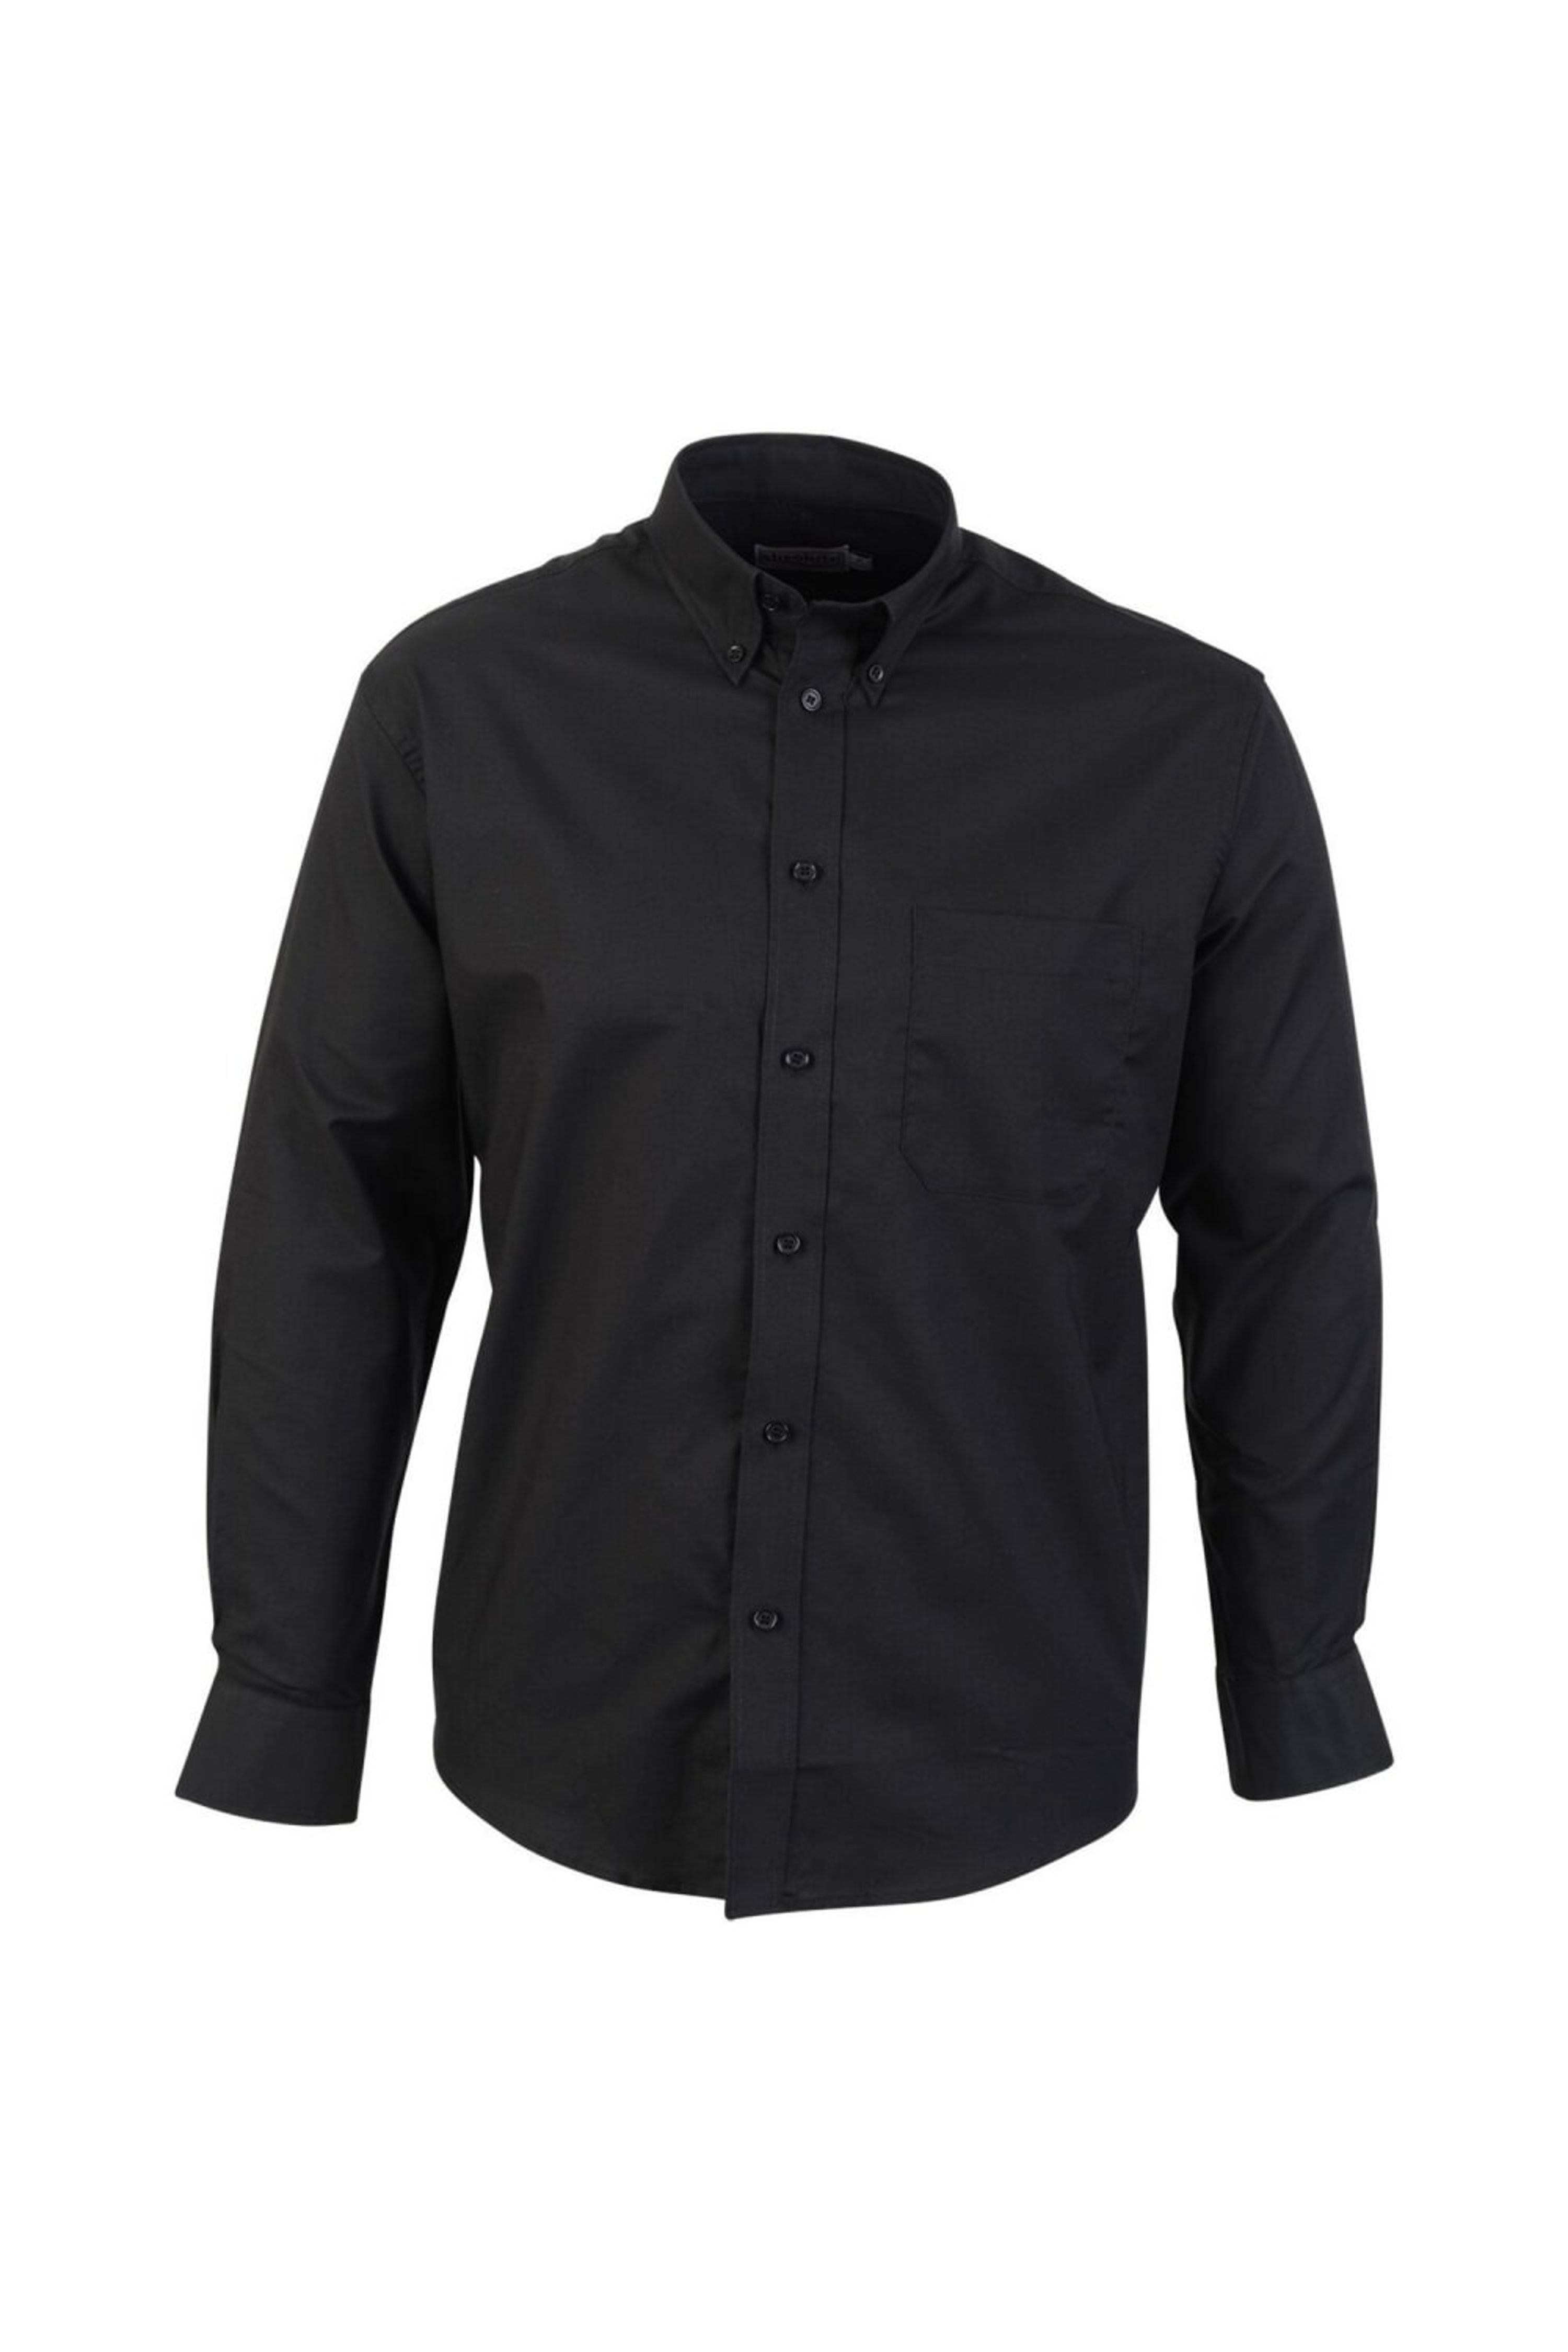 ABSOLUTE APPAREL ABSOLUTE APPAREL MENS LONG SLEEVED OXFORD SHIRT